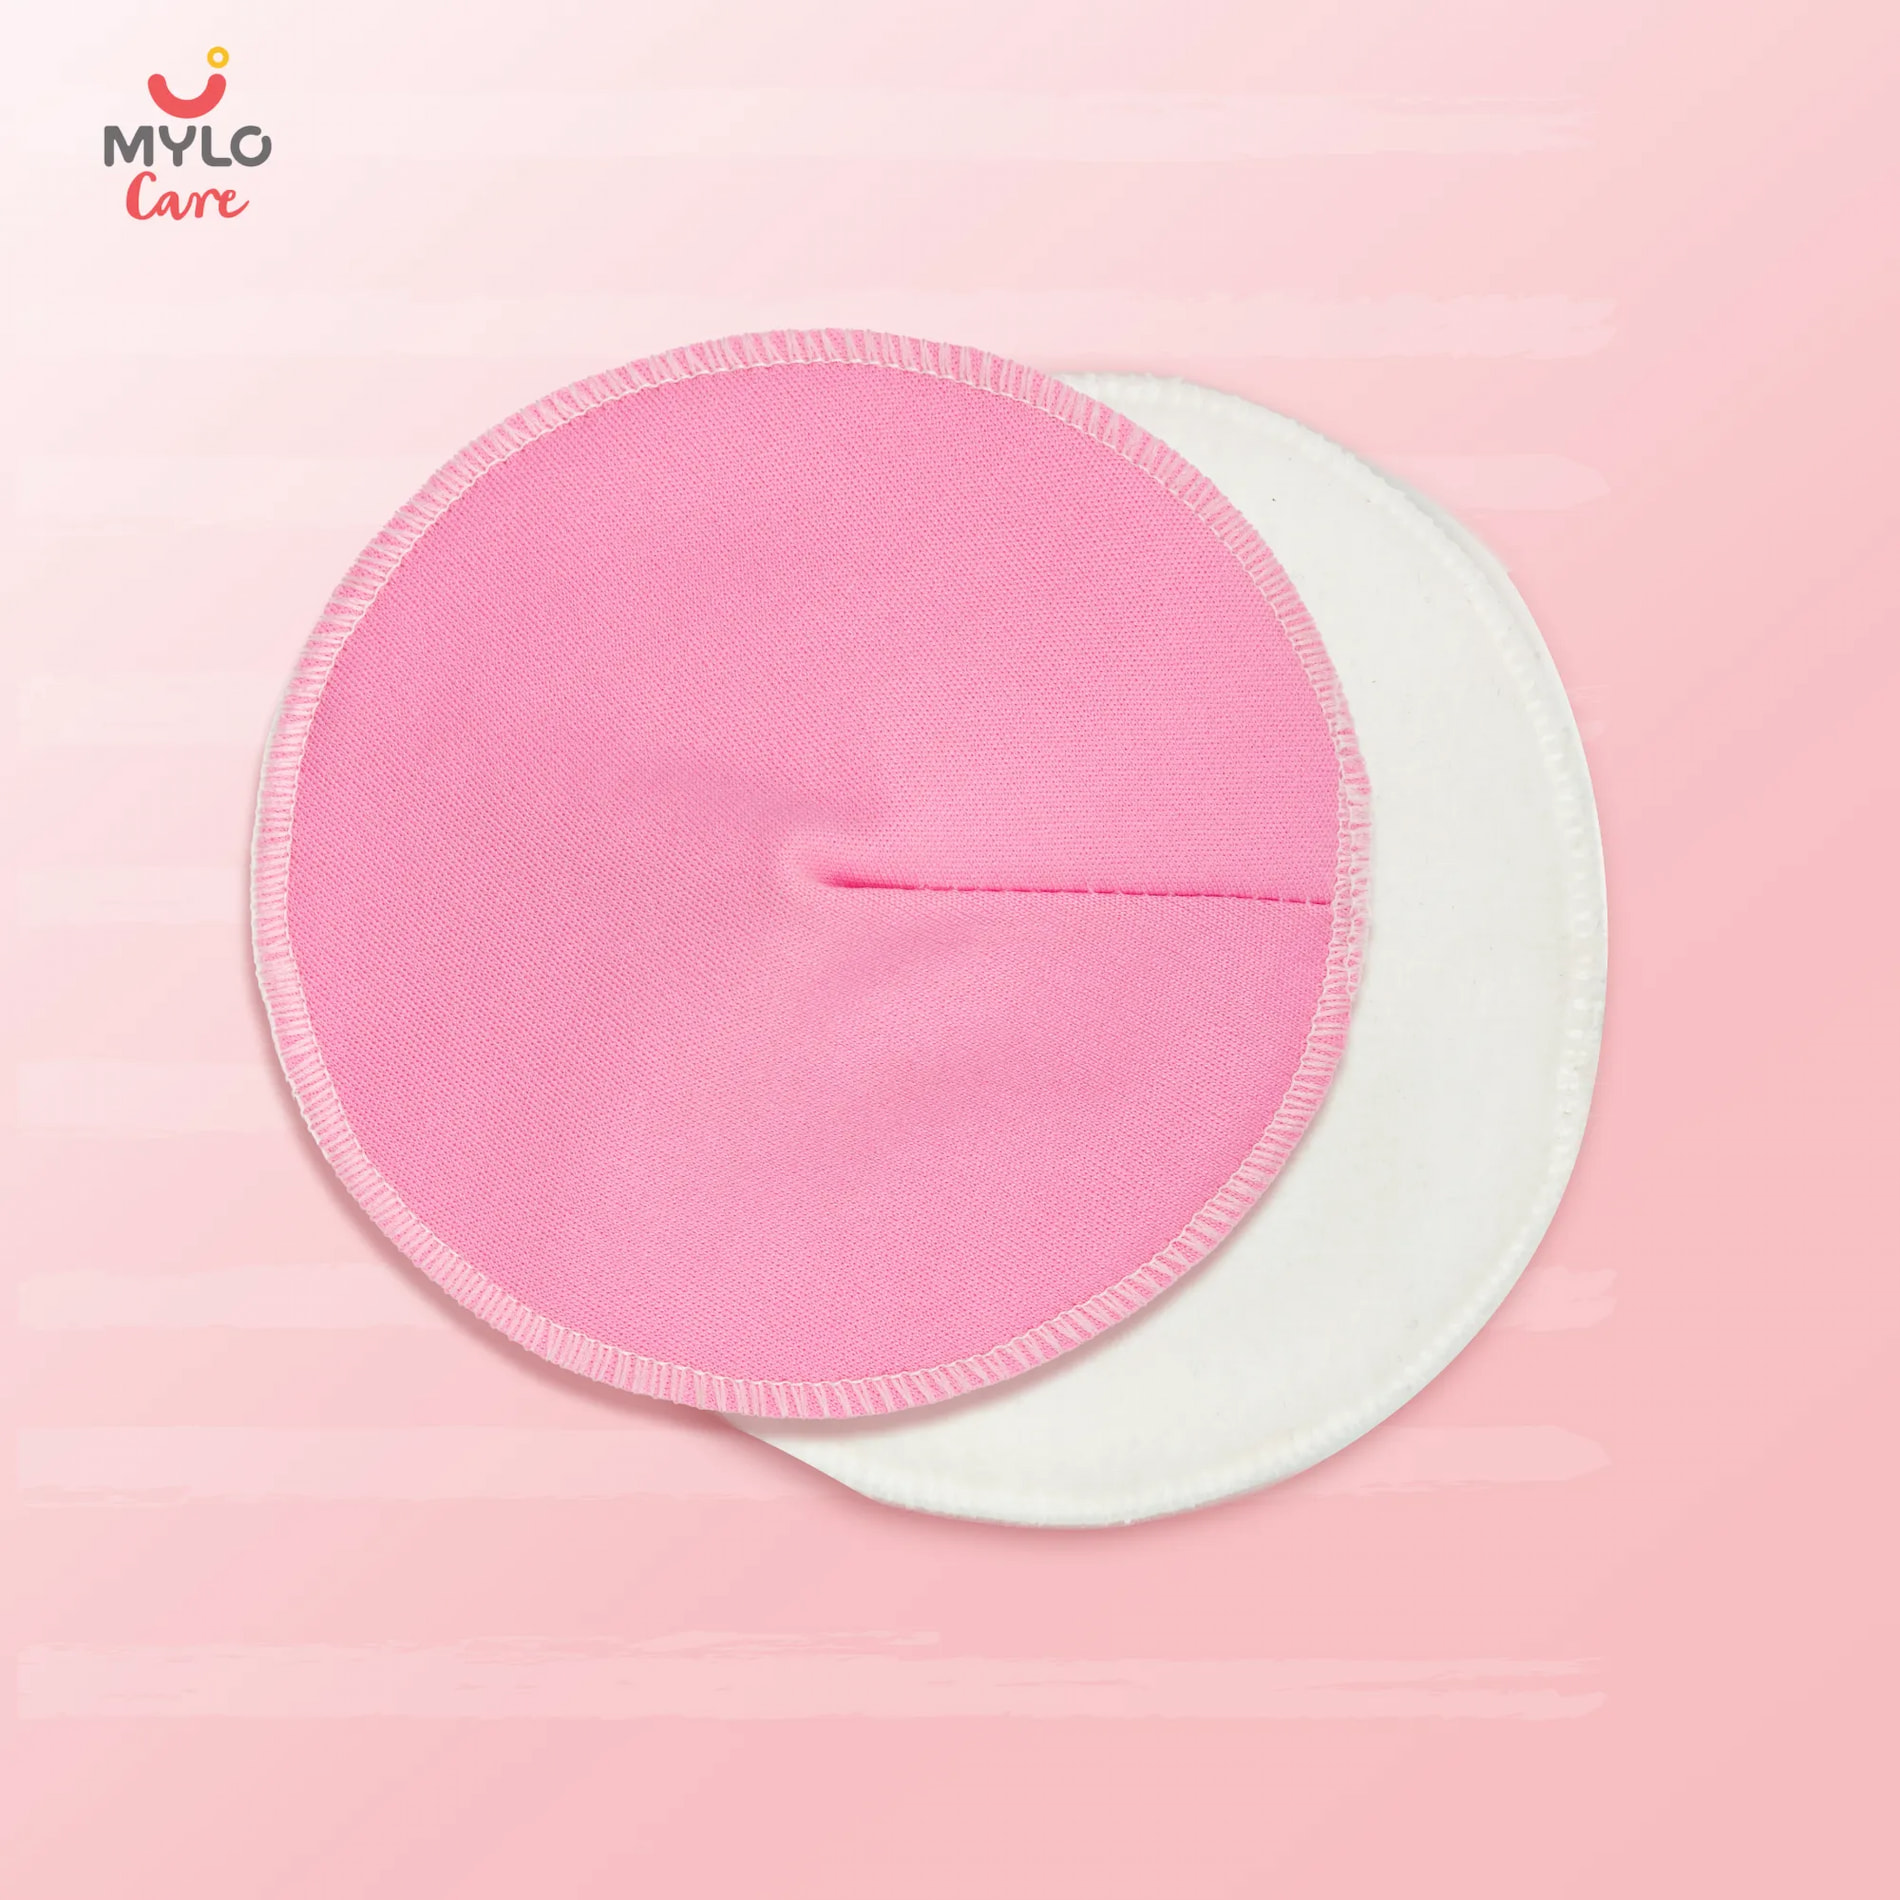 Reusable, Washable, Dry feel Nursing/ Breast Feeding Pads with Free Laundry pouch –Baby Pink -1 Pair 